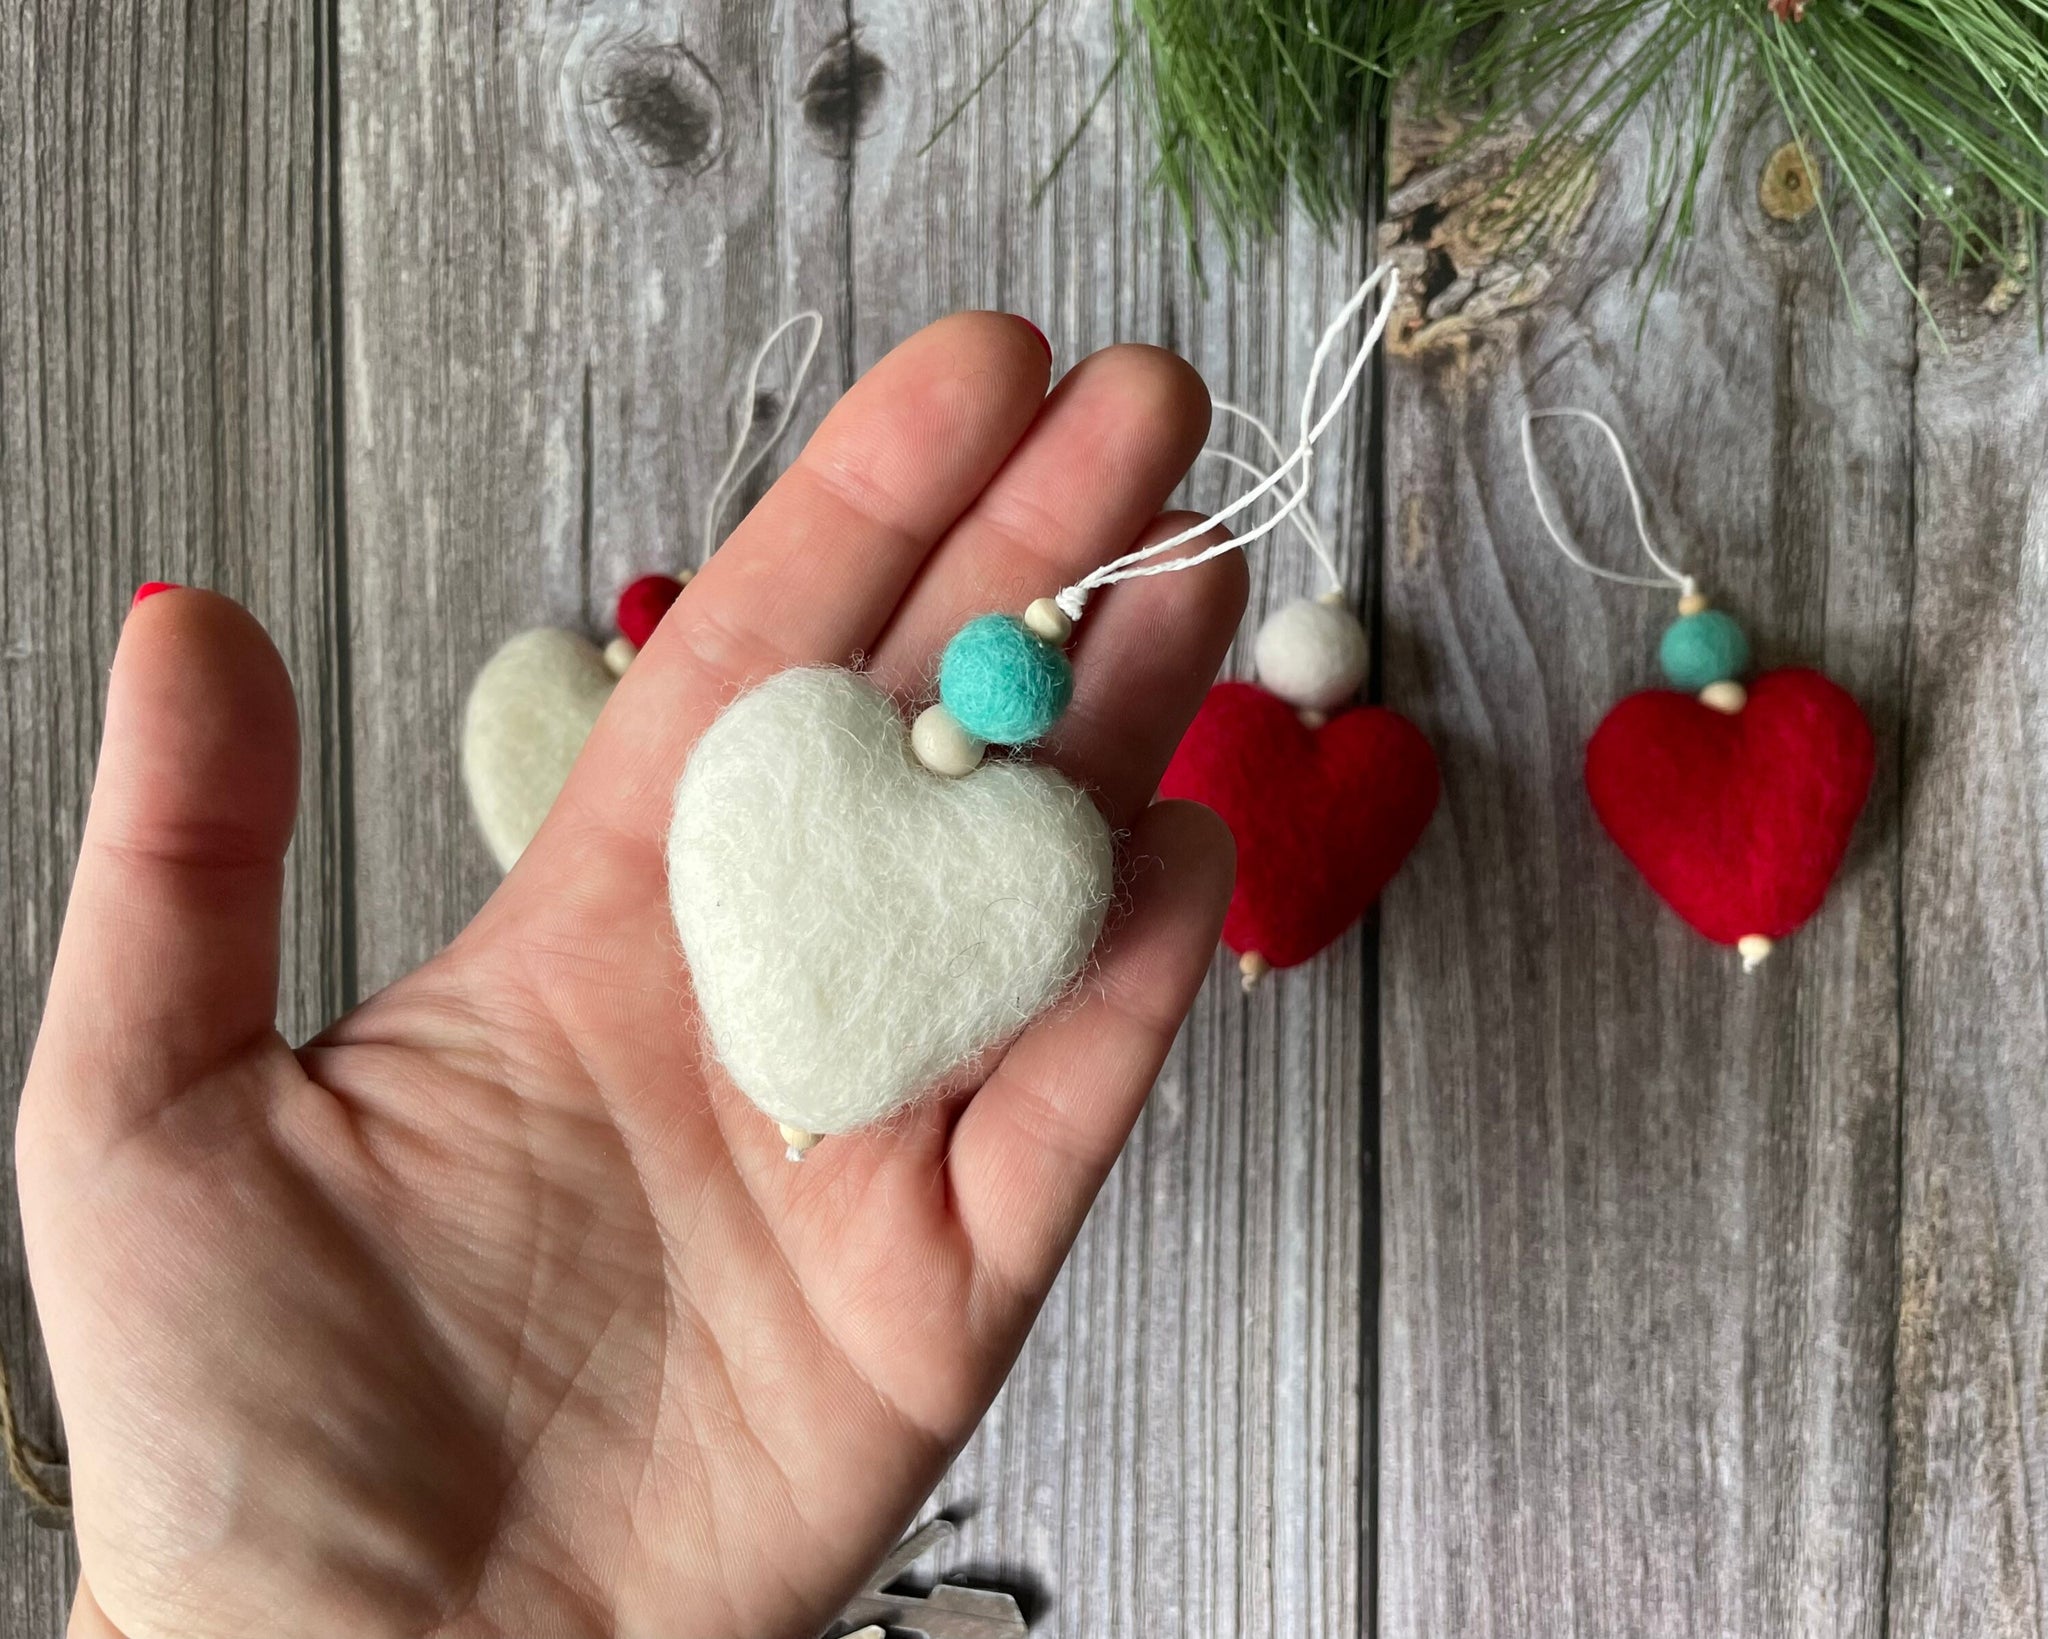 Felt Heart Ornaments with Berries